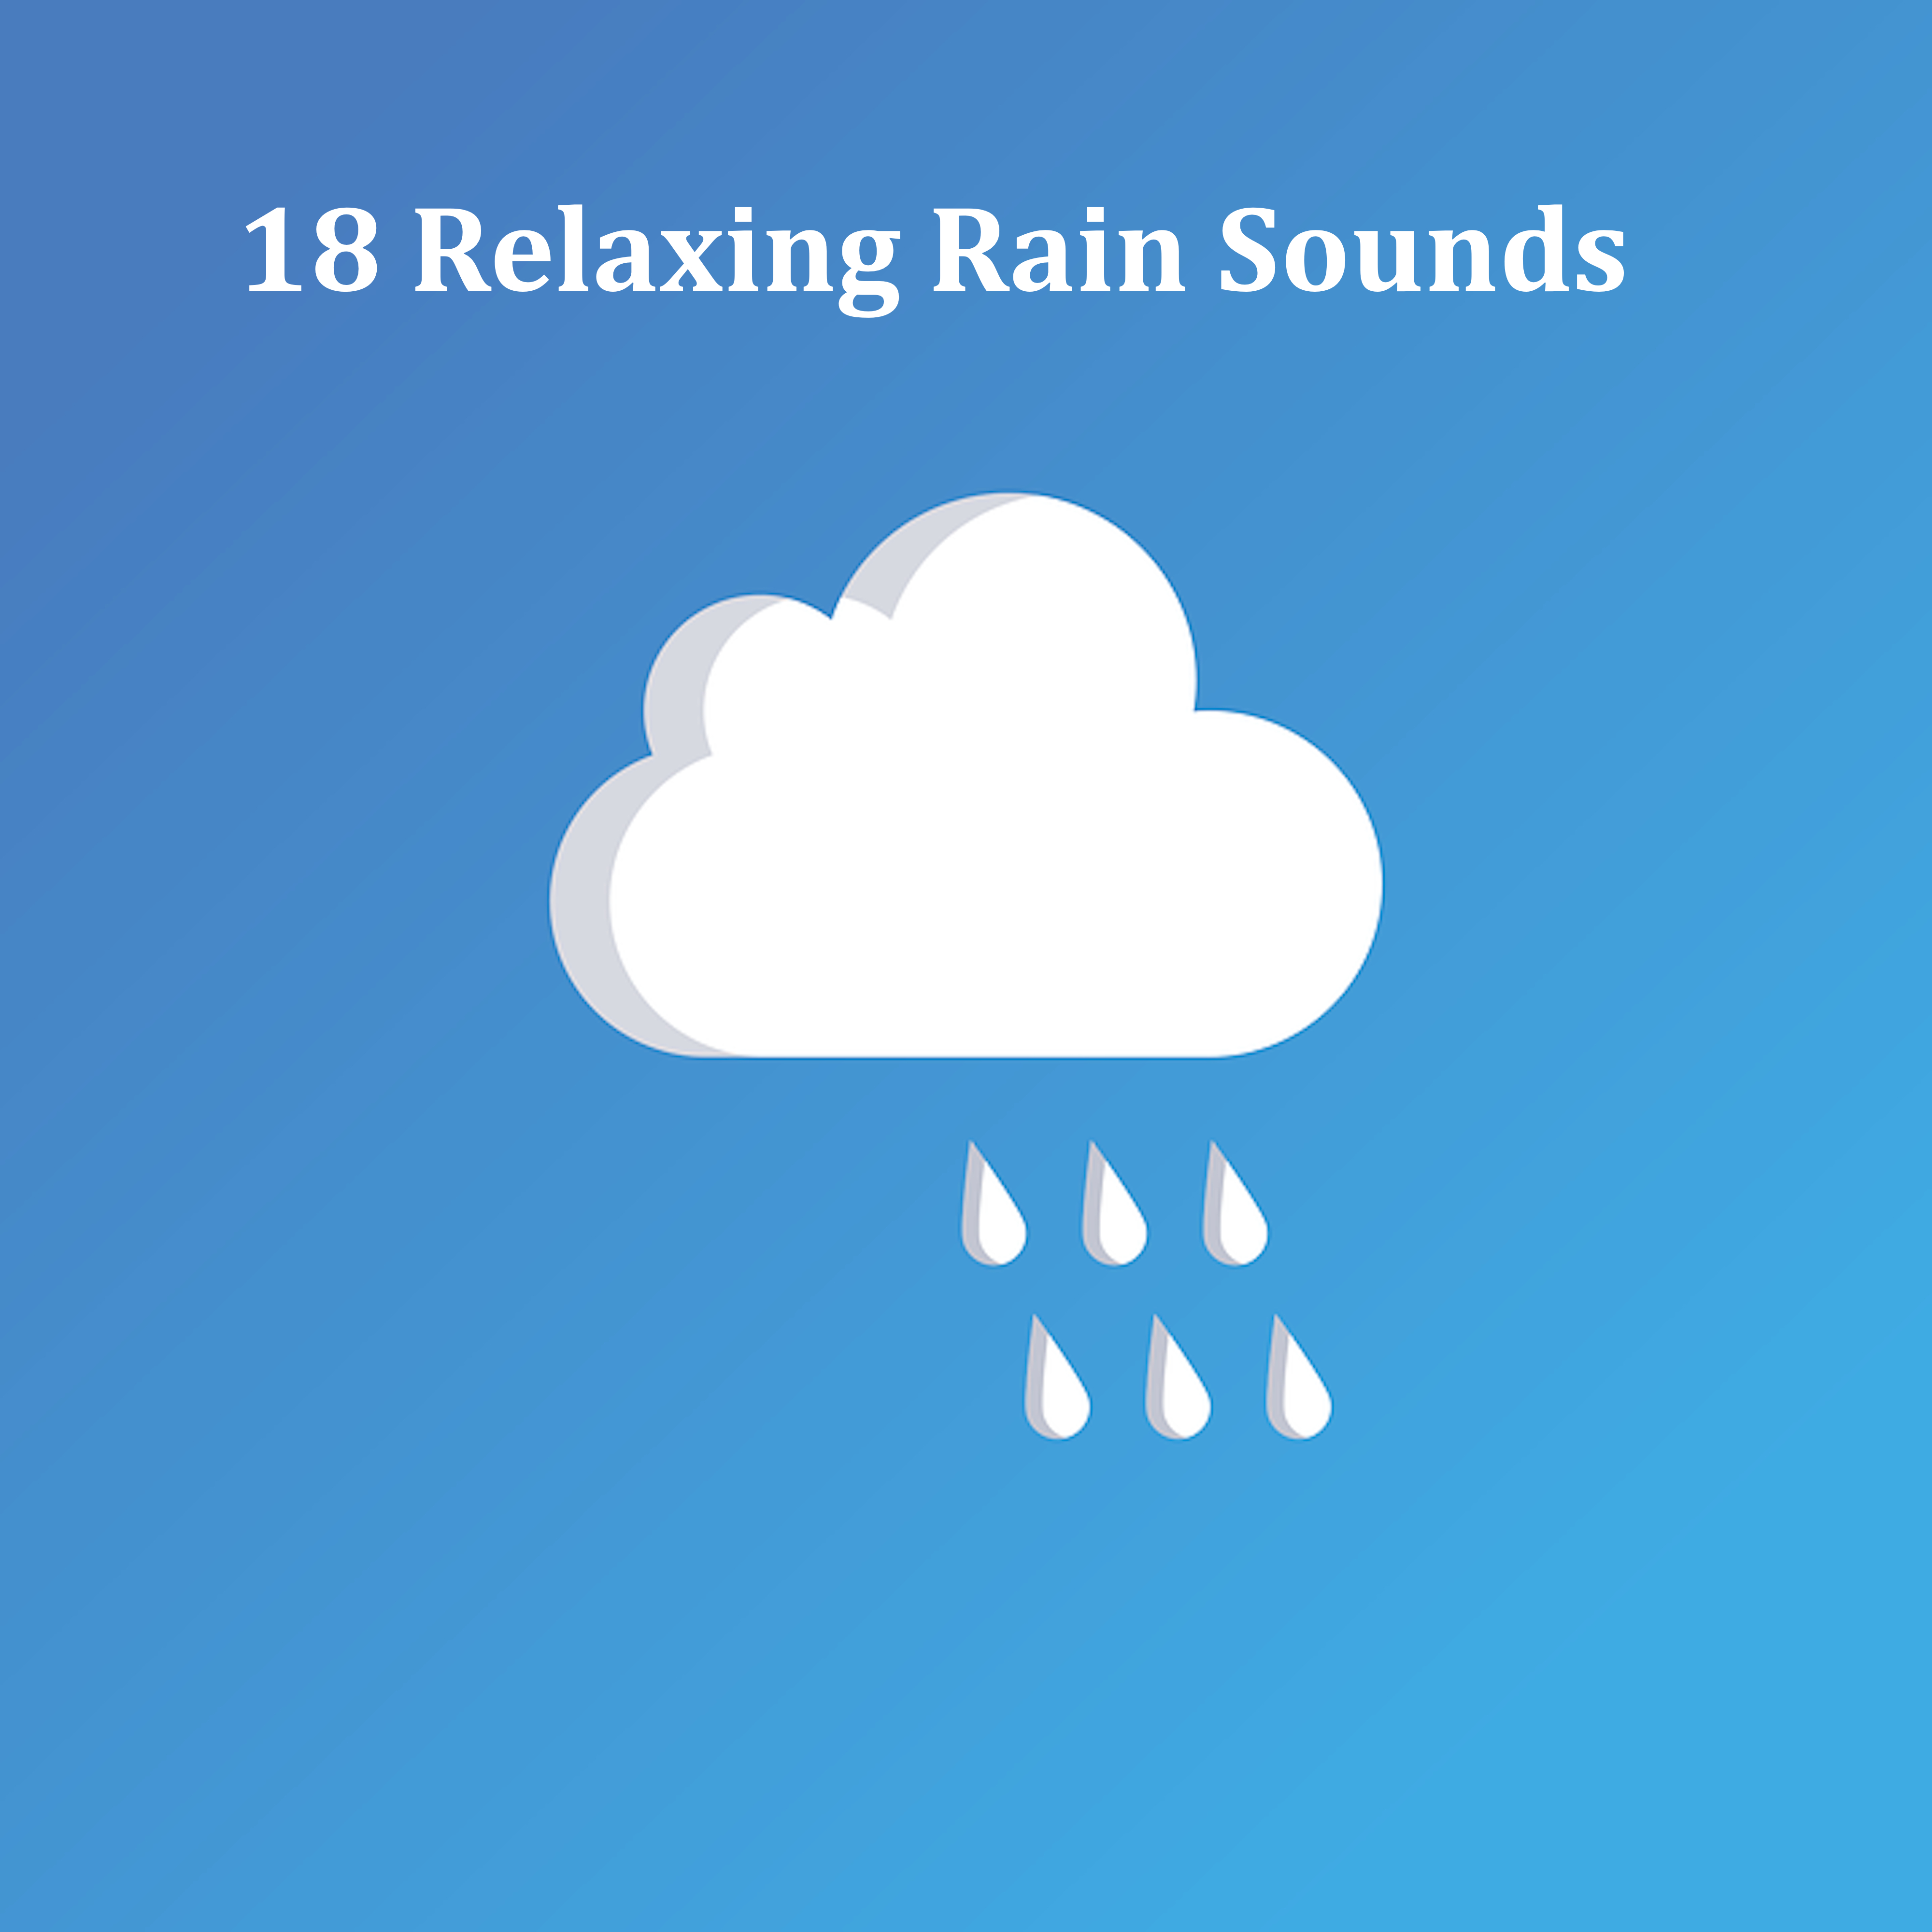 18 Relaxing Rain Sounds for Sleep, Meditation, Relaxation, Yoga and Wellbeing